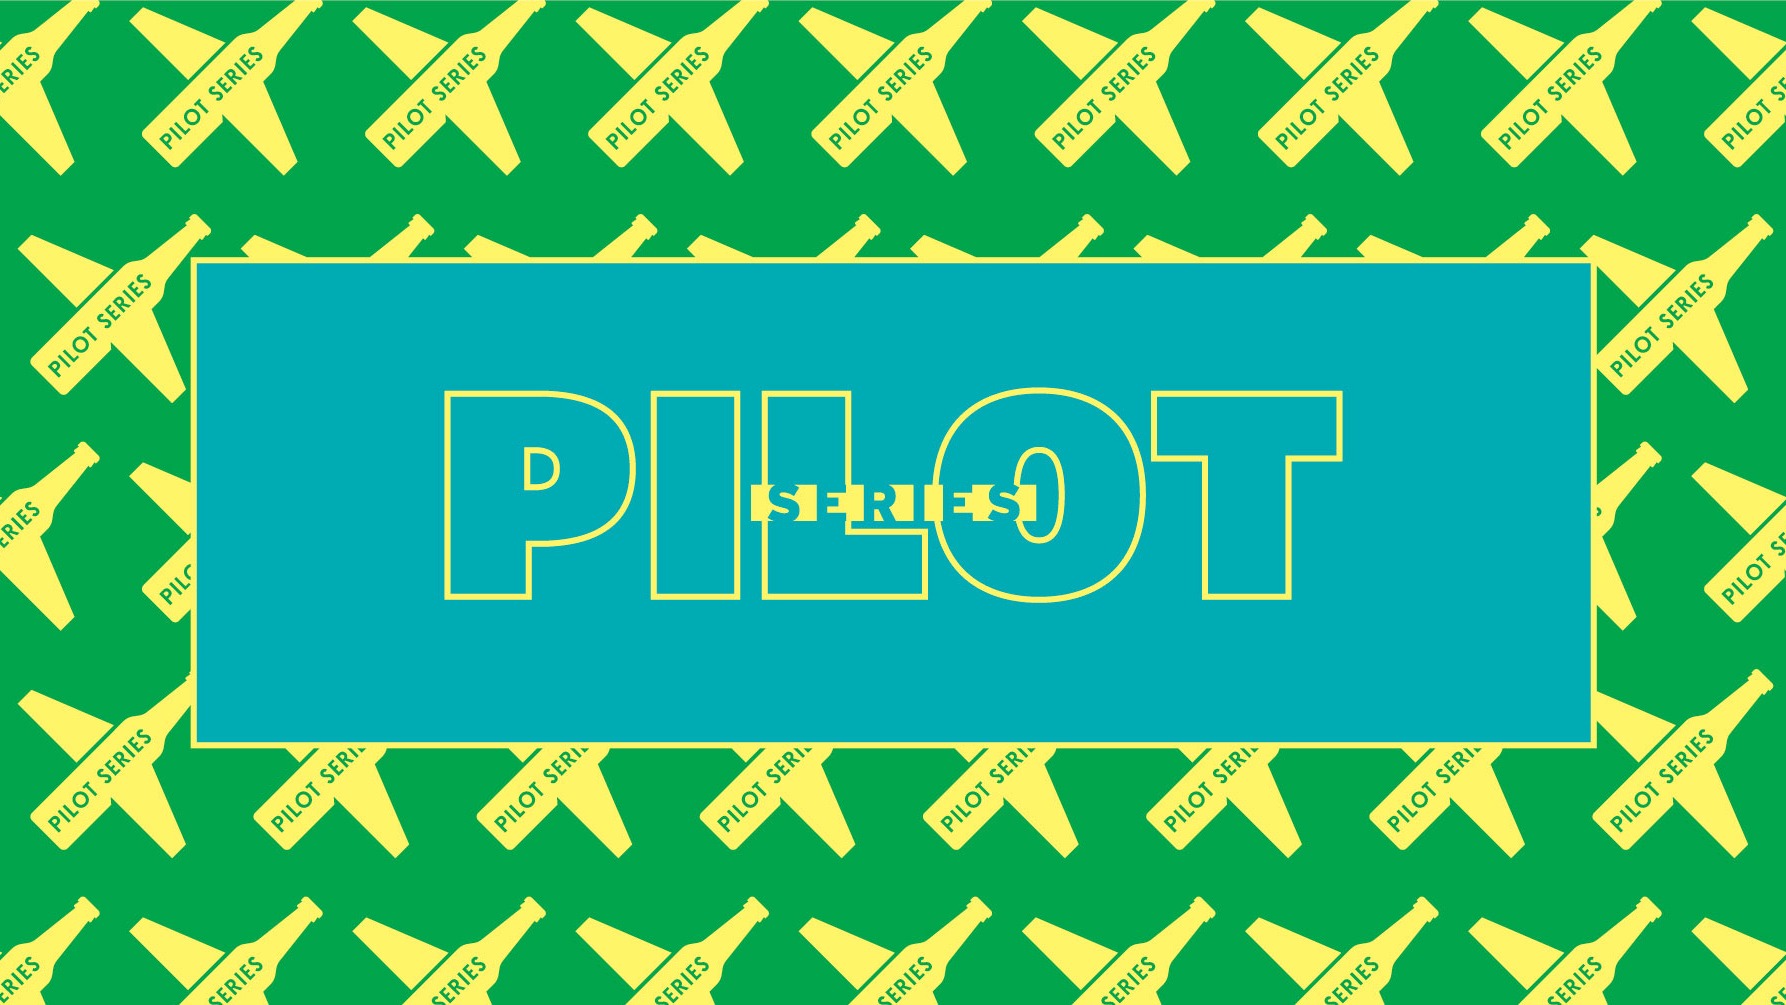 "PILOT SERIES" text inside of a blue rectangle. The blue rectangle sits on top of a larger green rectangle that has yellow beer bottles shaped like airplanes.